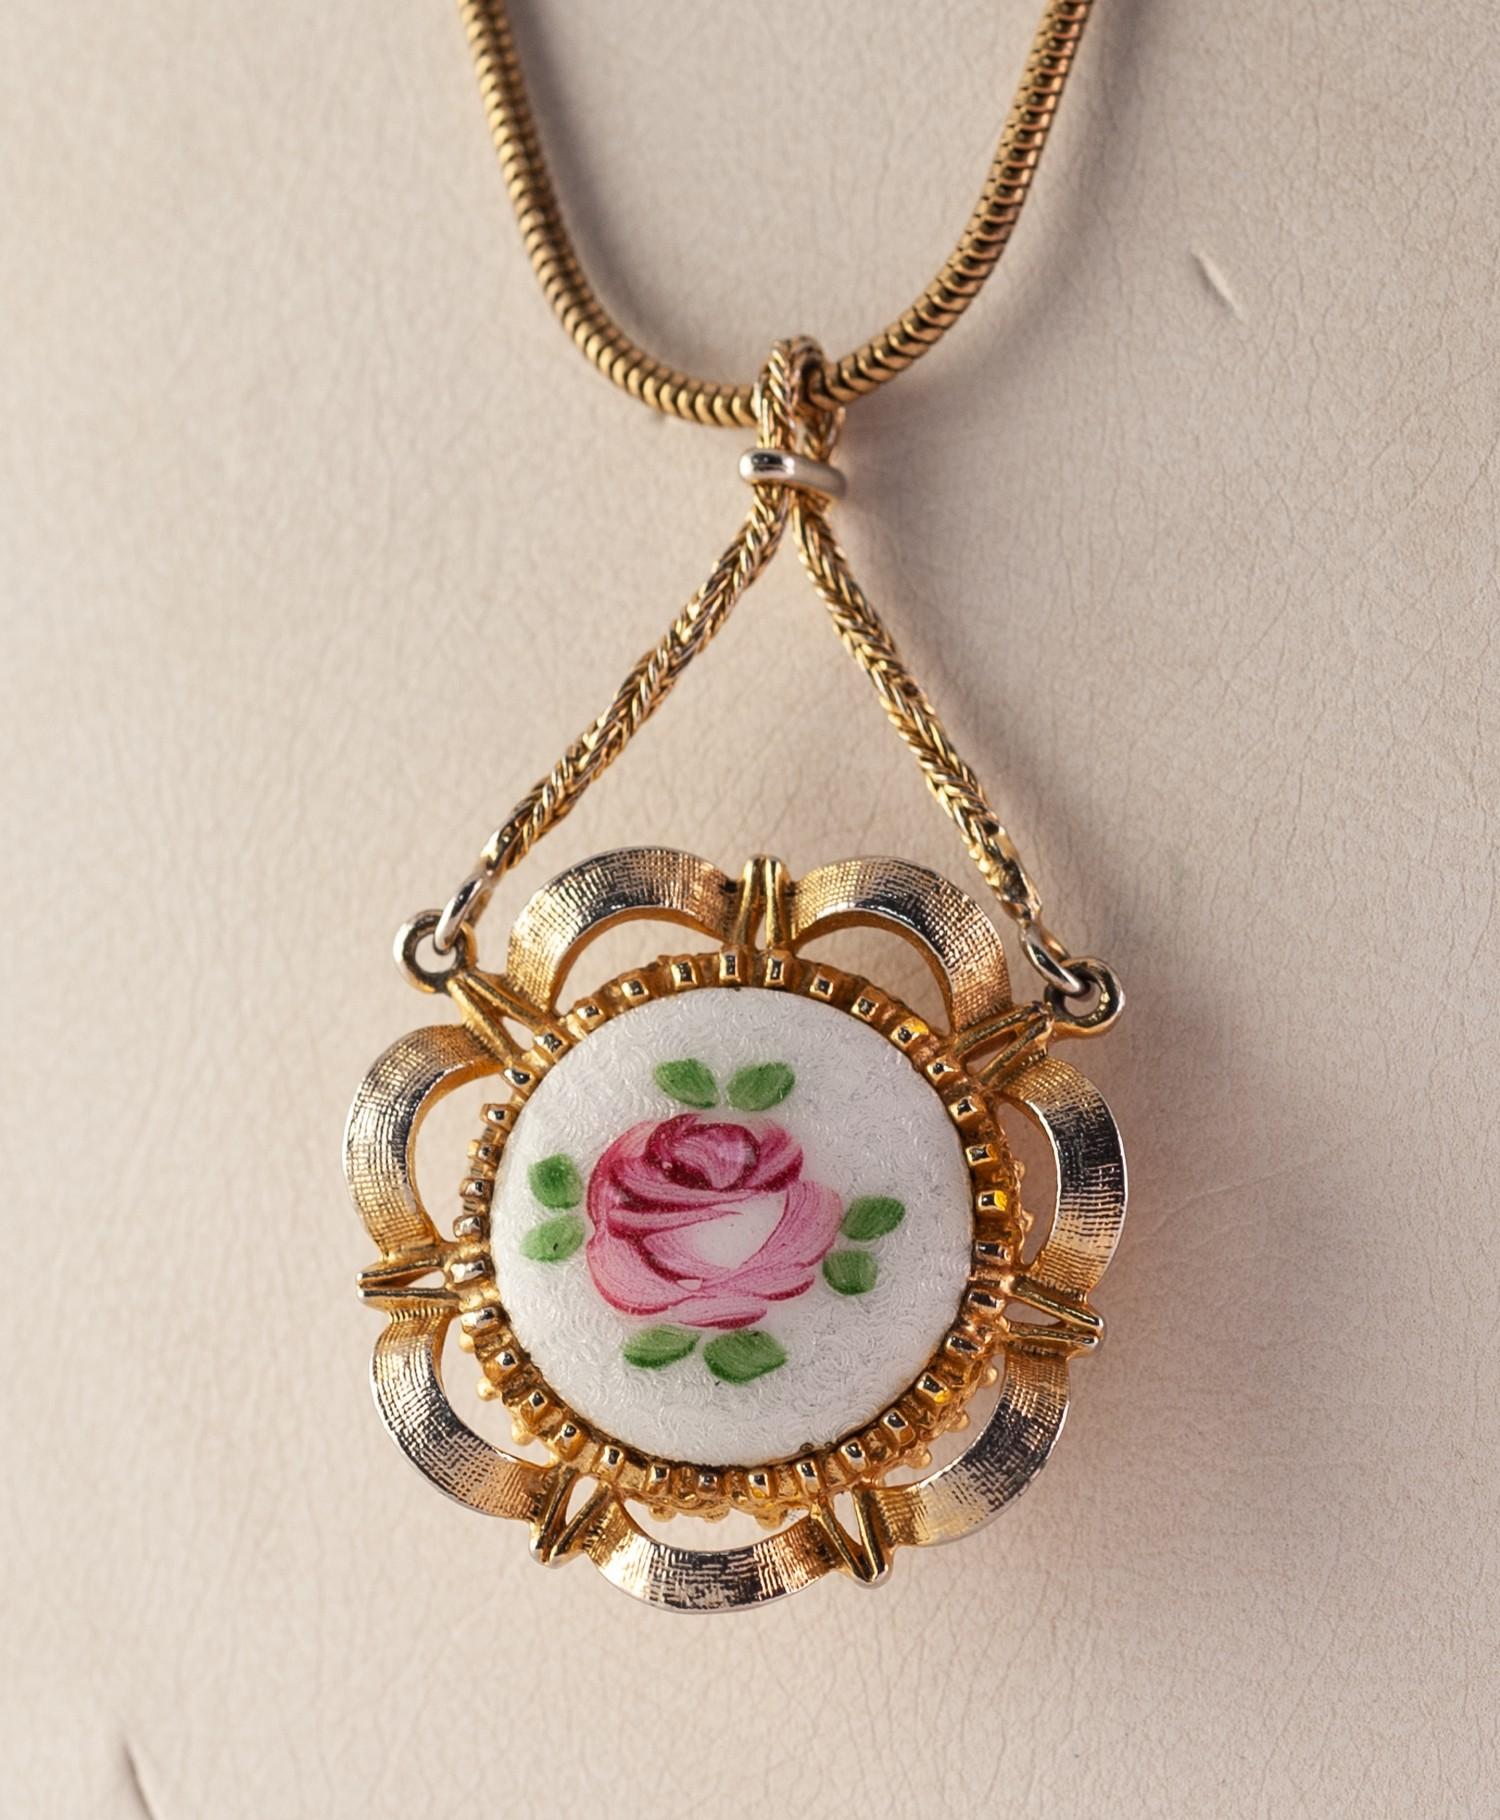 LADY'S COROCRAFT SWISS GOLD PLATED FANCY PENDANT WATCH, the back enamelled with a rose, on a long - Image 2 of 2